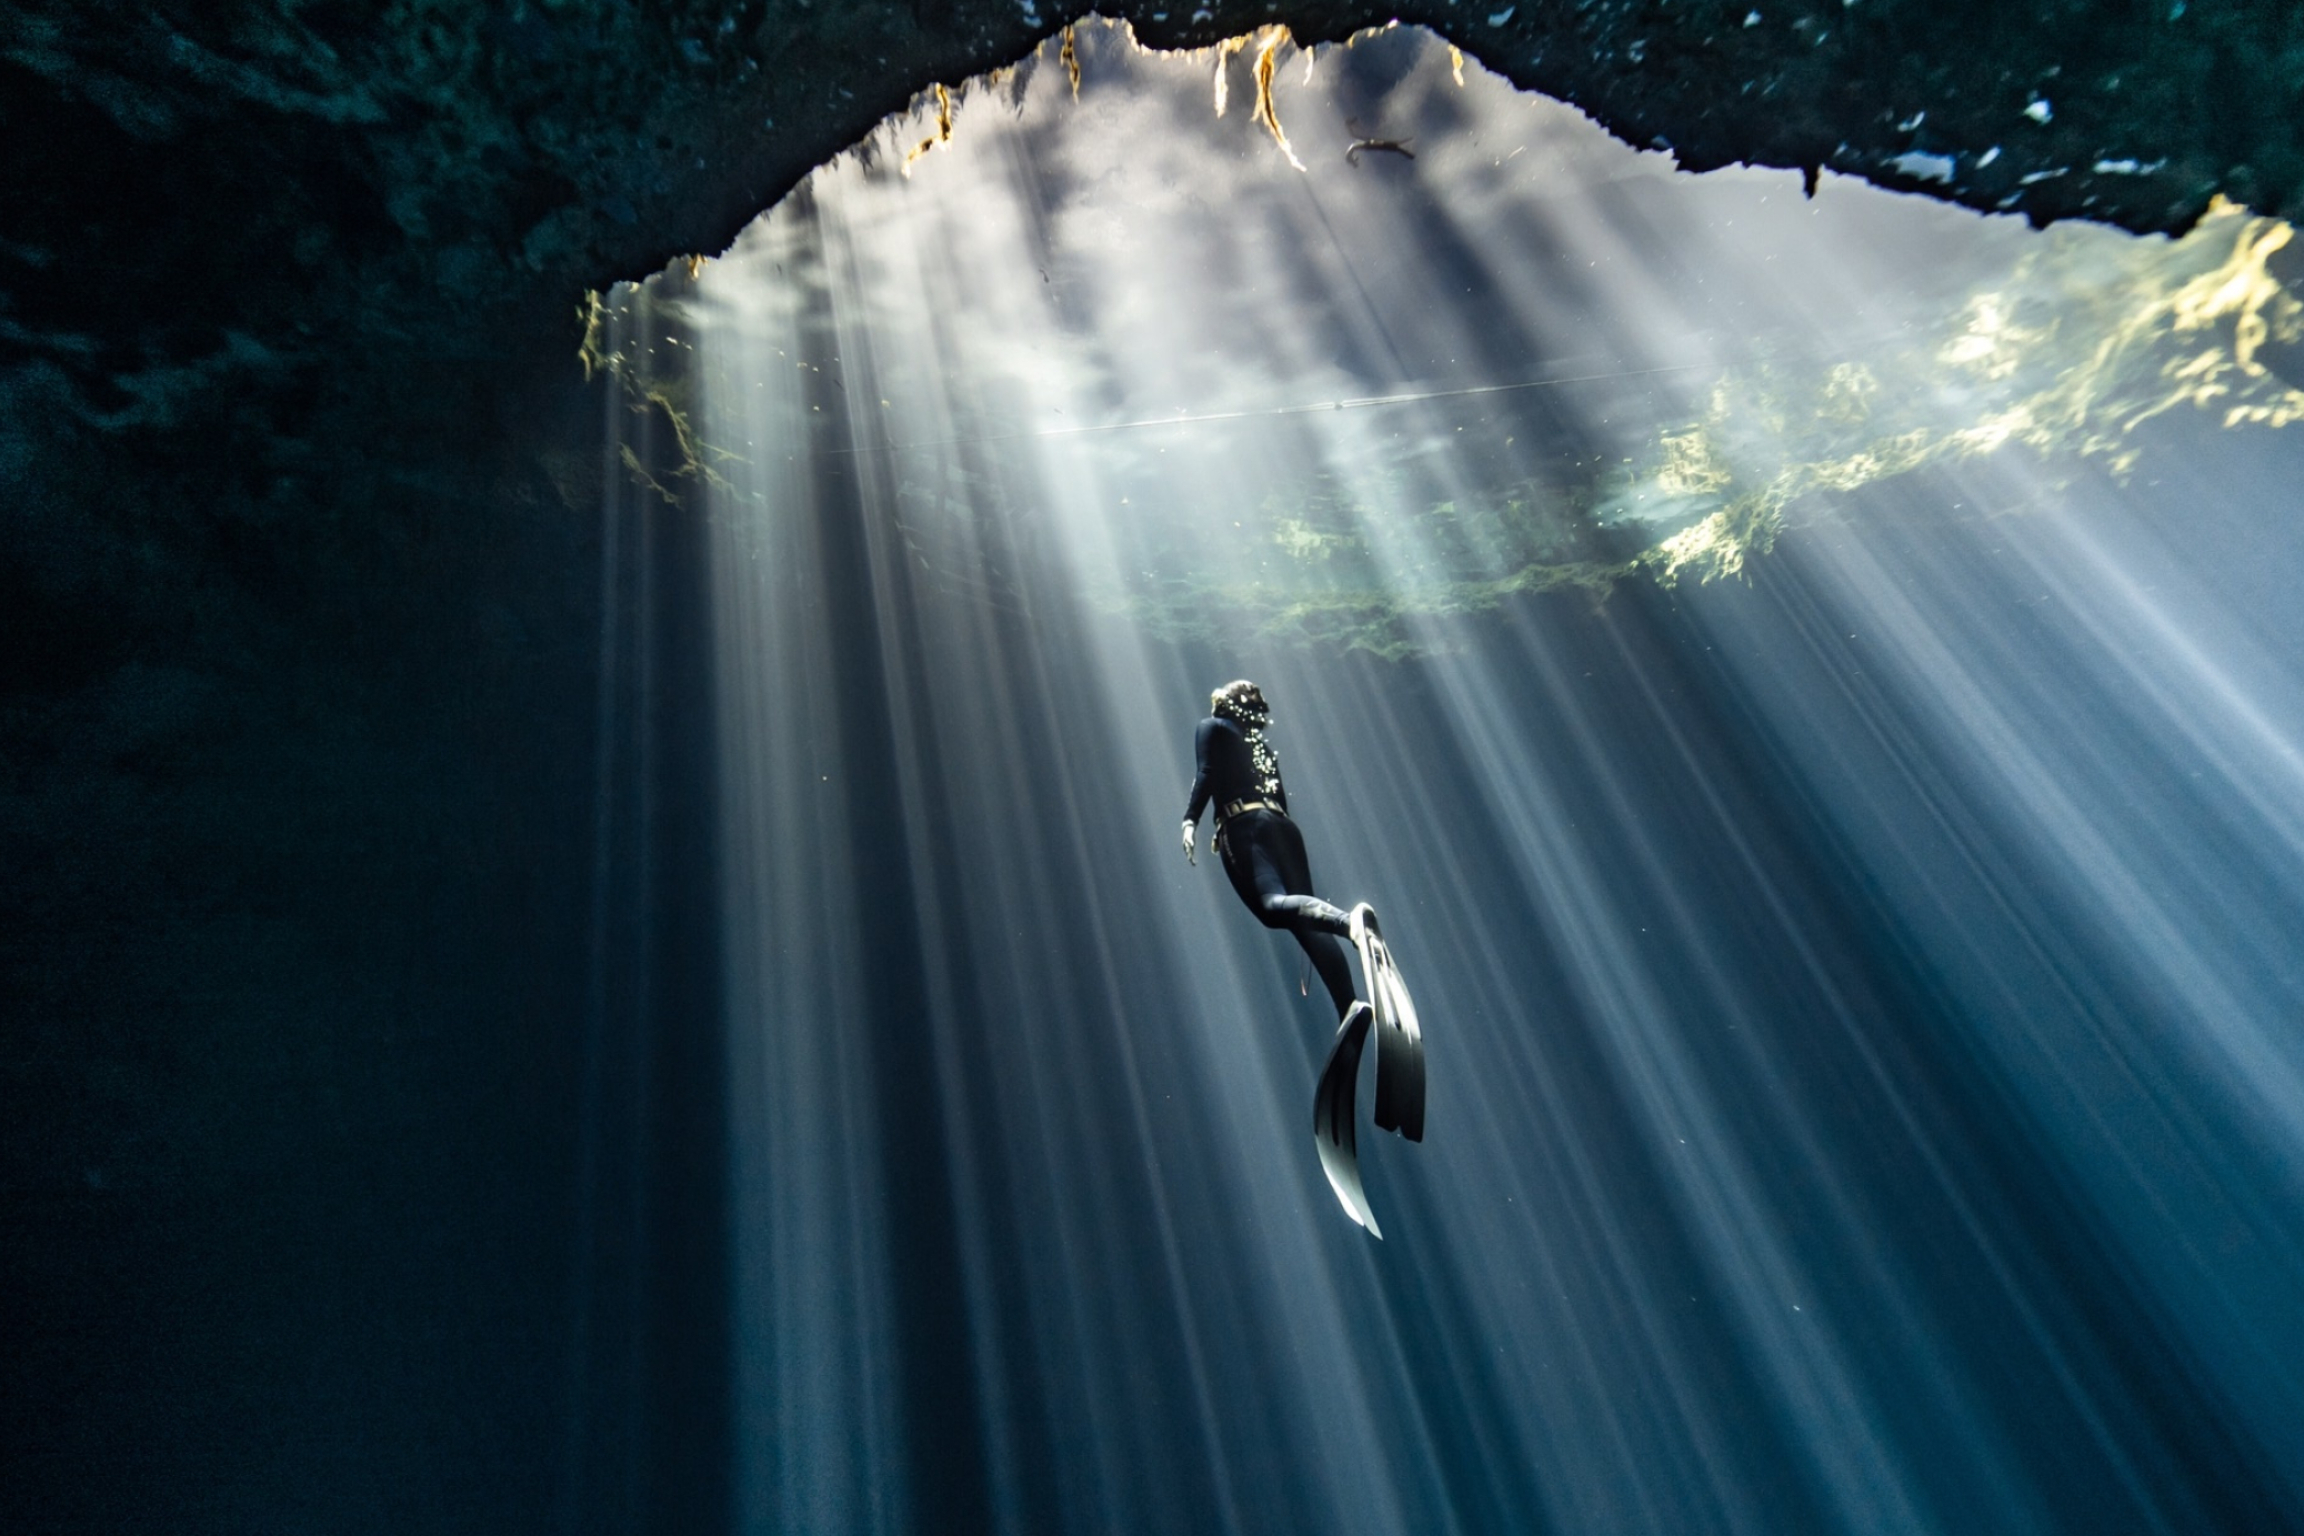 Freediving: A cave skin diving activity, An adventurous sport of an extremely high risk. 2310x1540 HD Wallpaper.